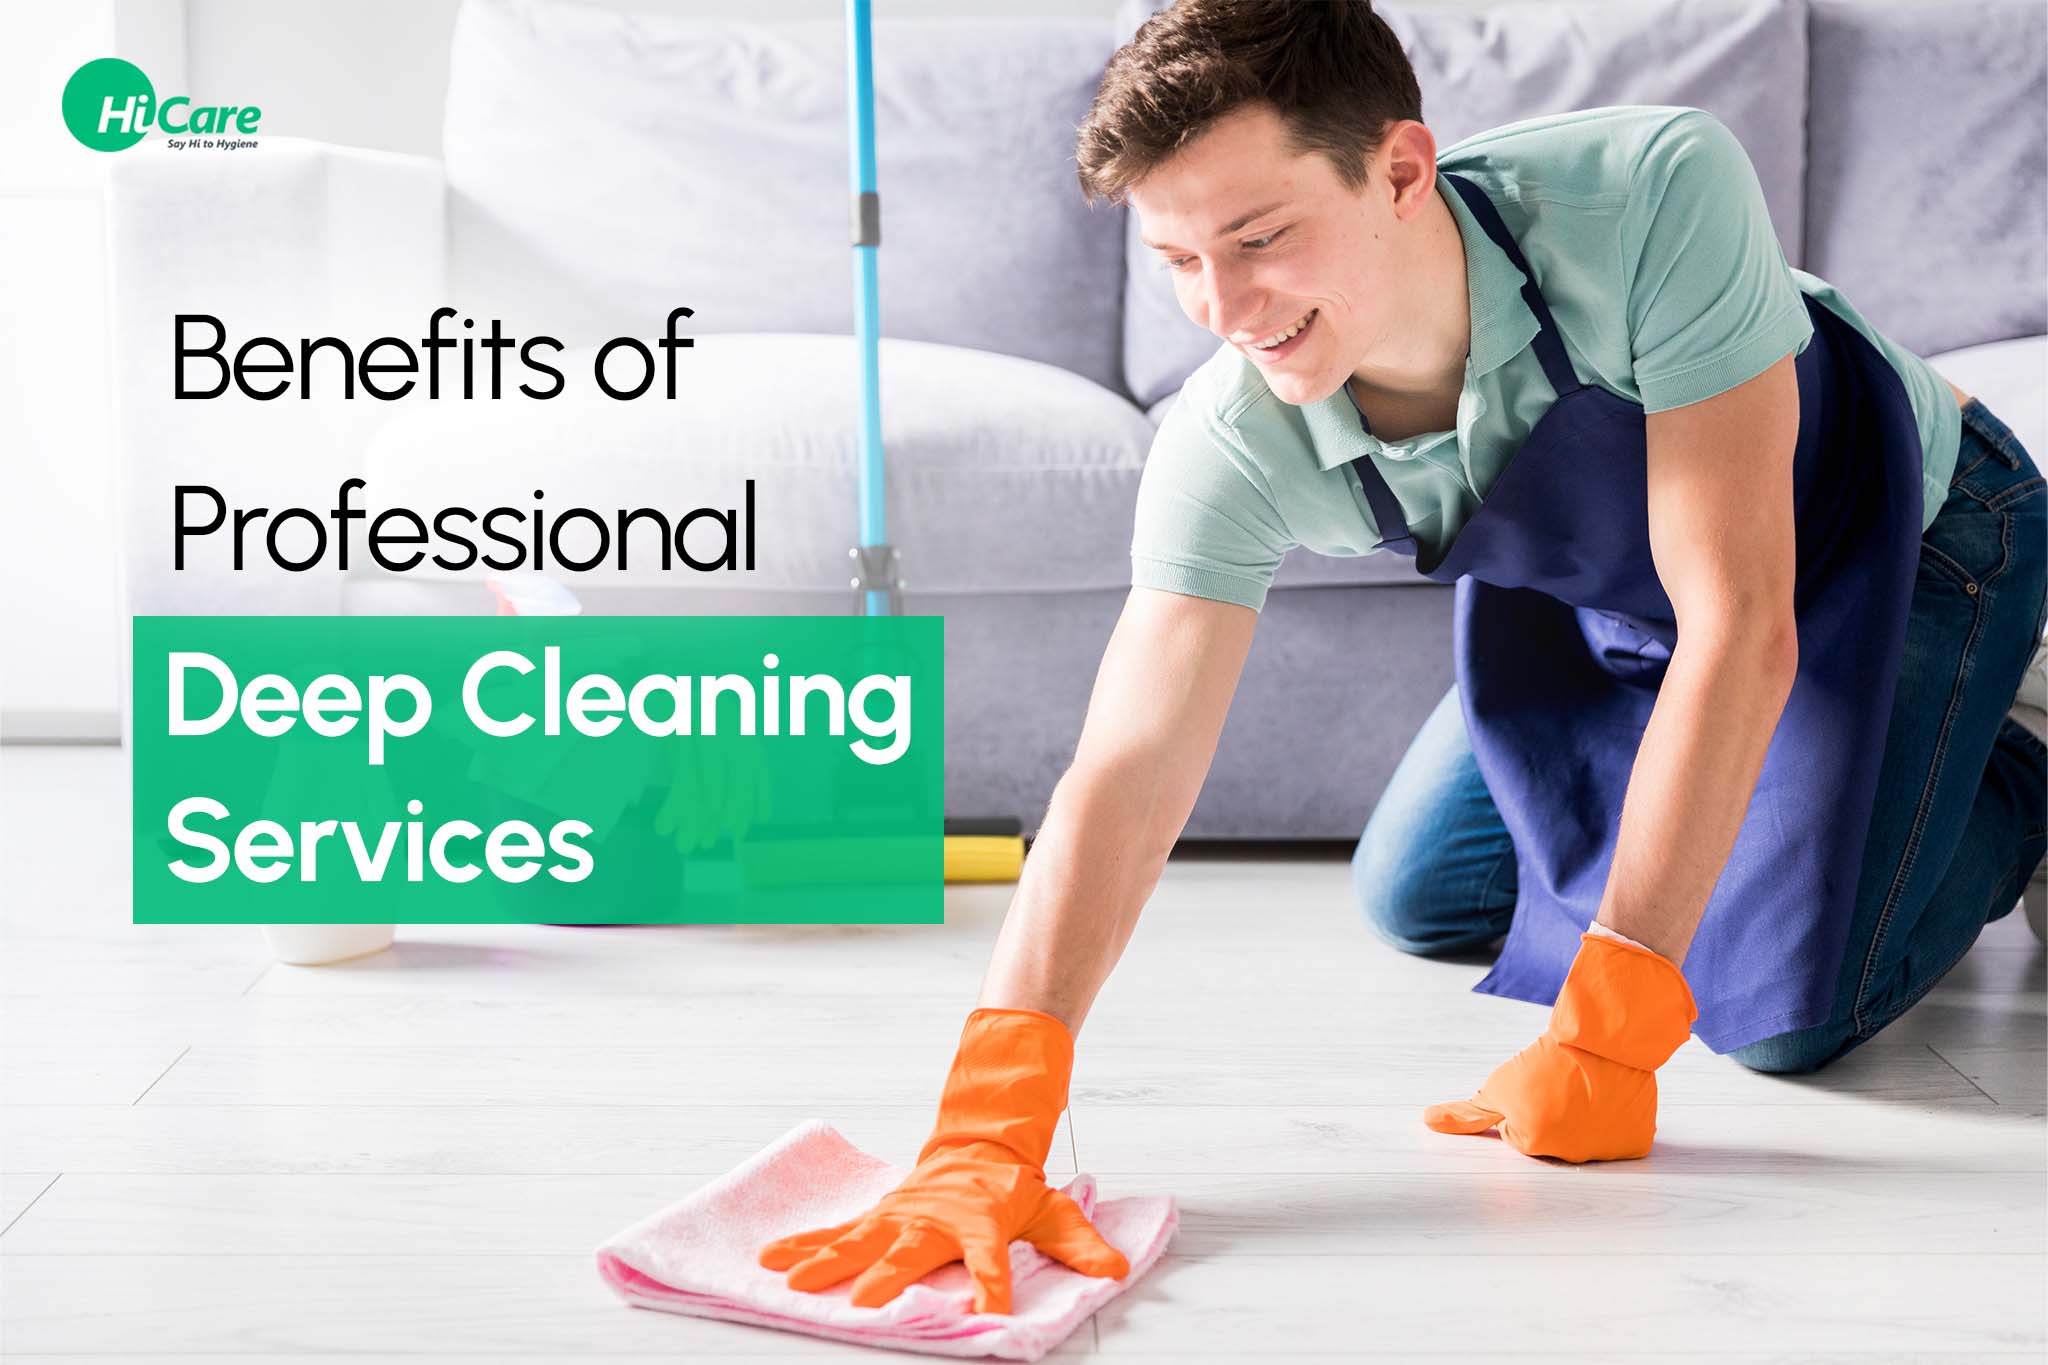 Household Cleaners and Professional Cleaners